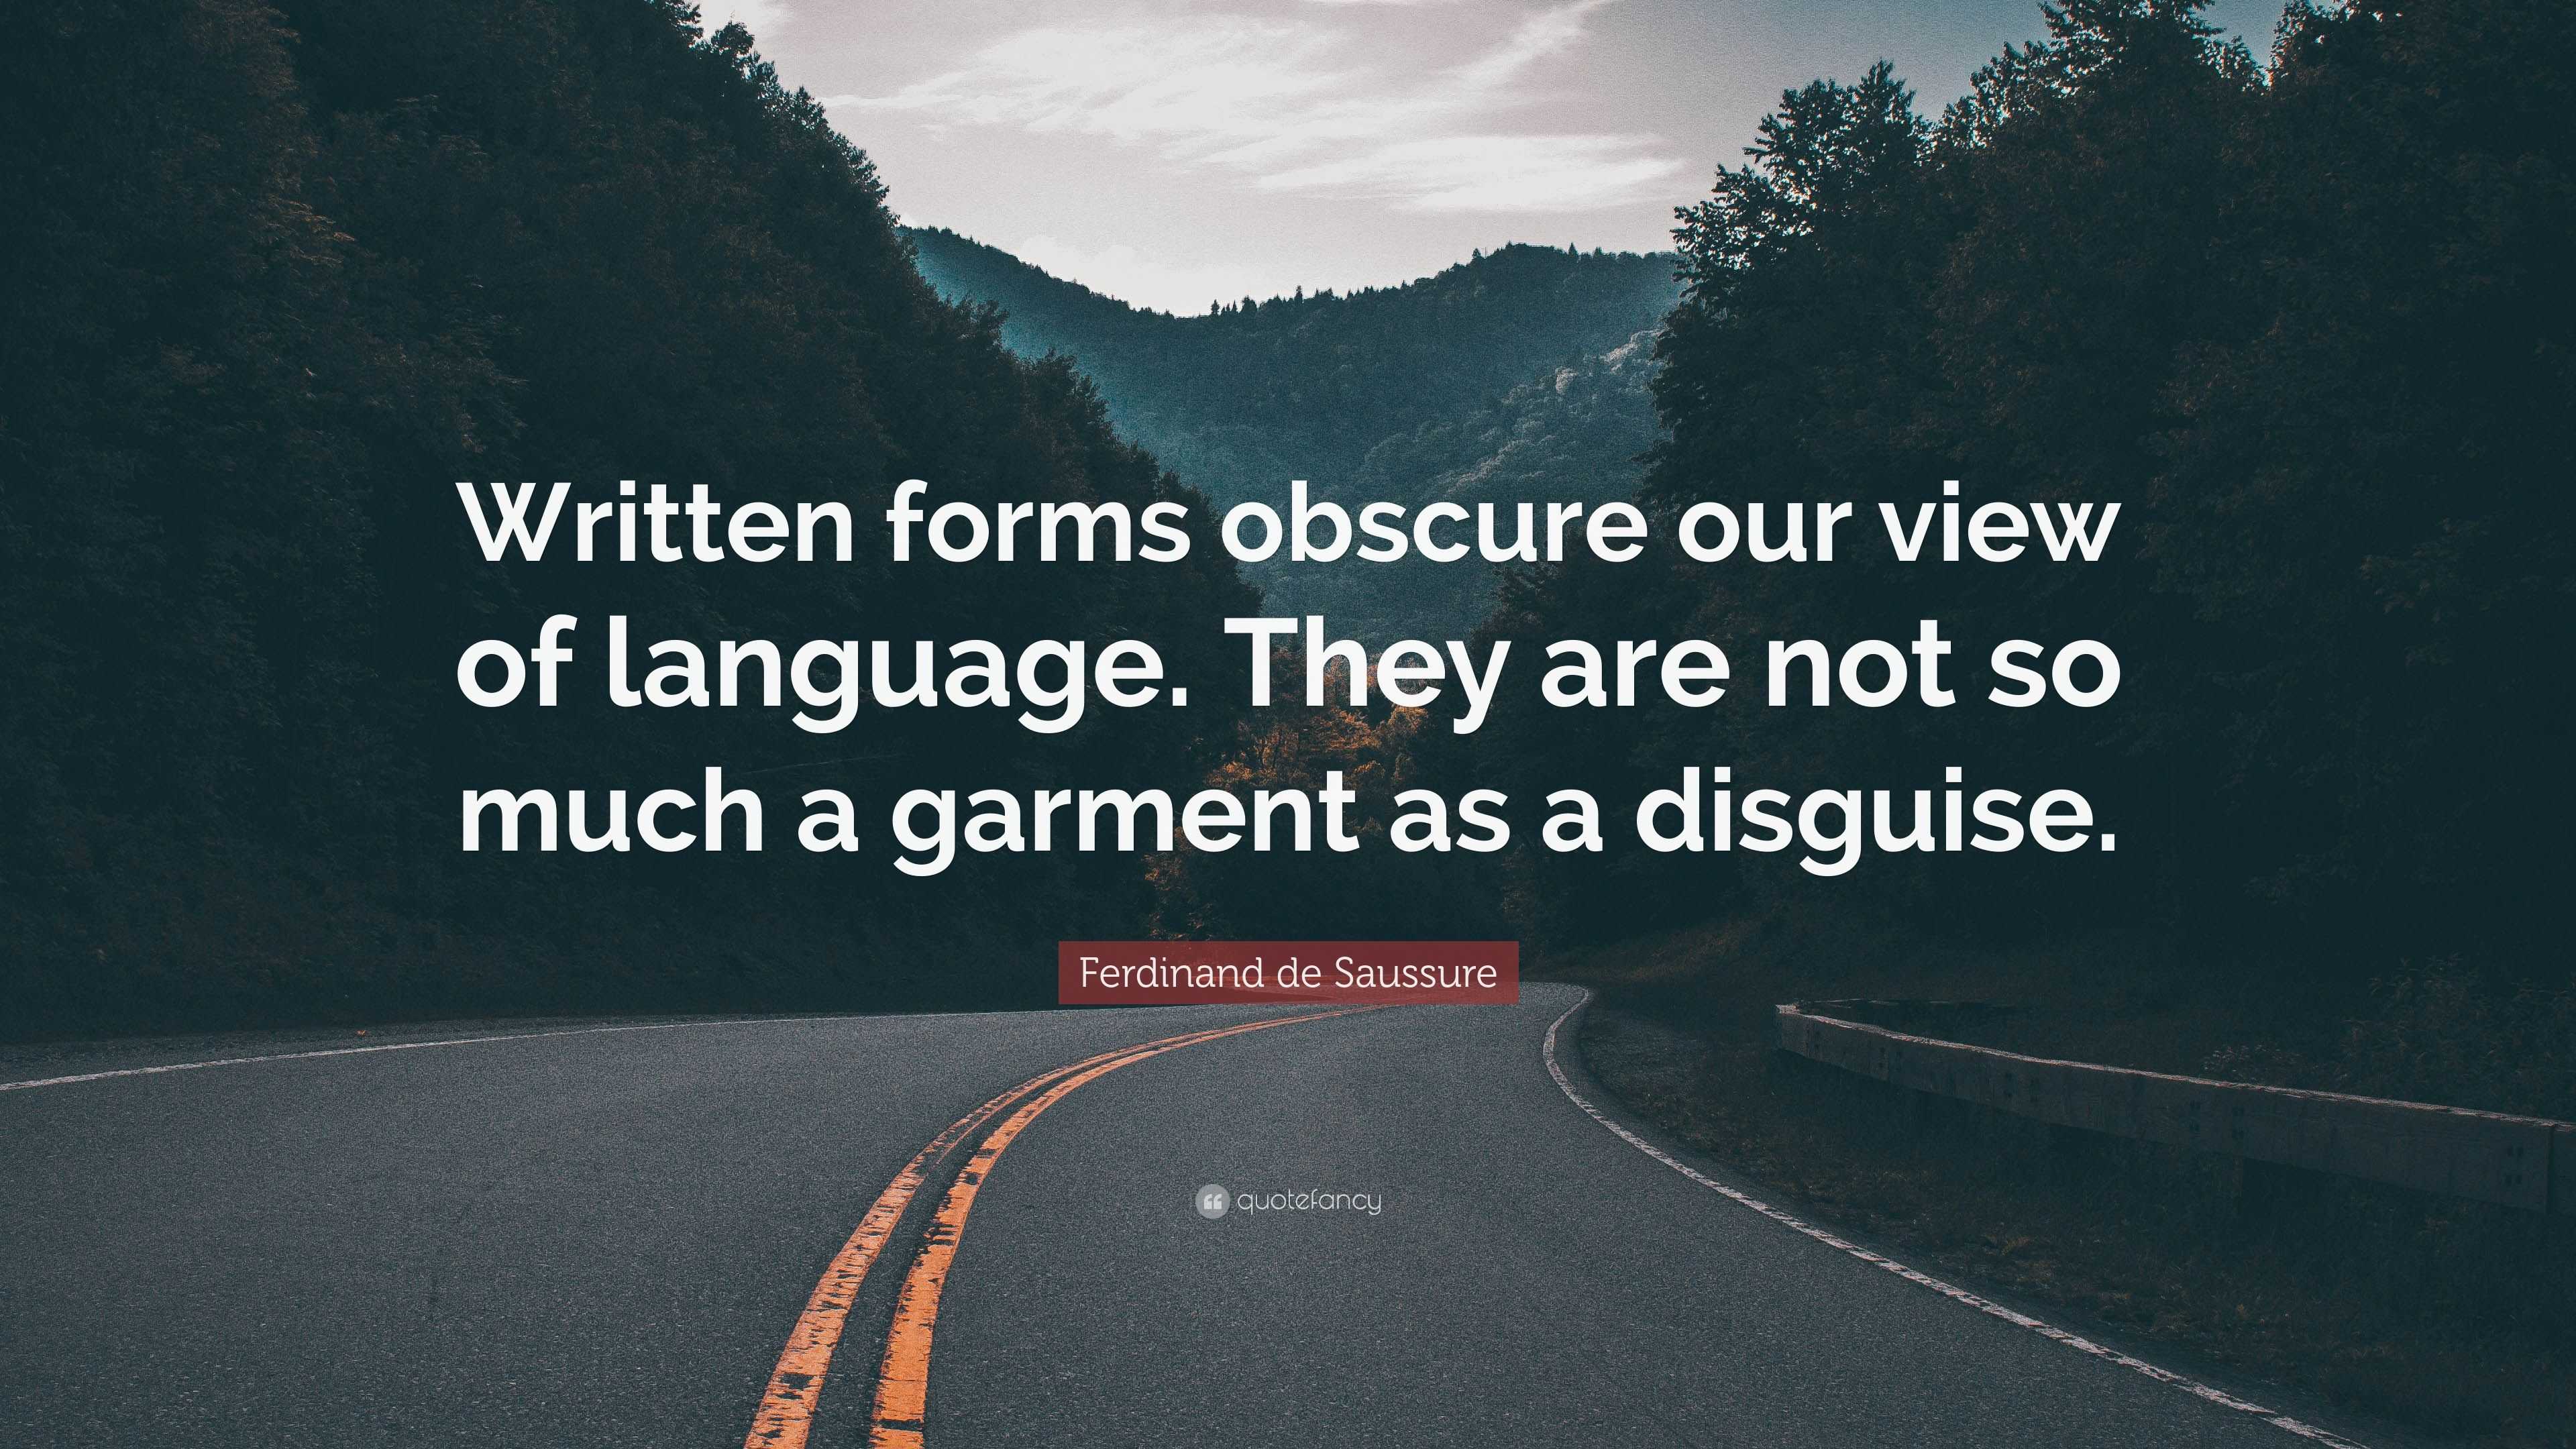 Ferdinand de Saussure Quote: “Written forms obscure our view of